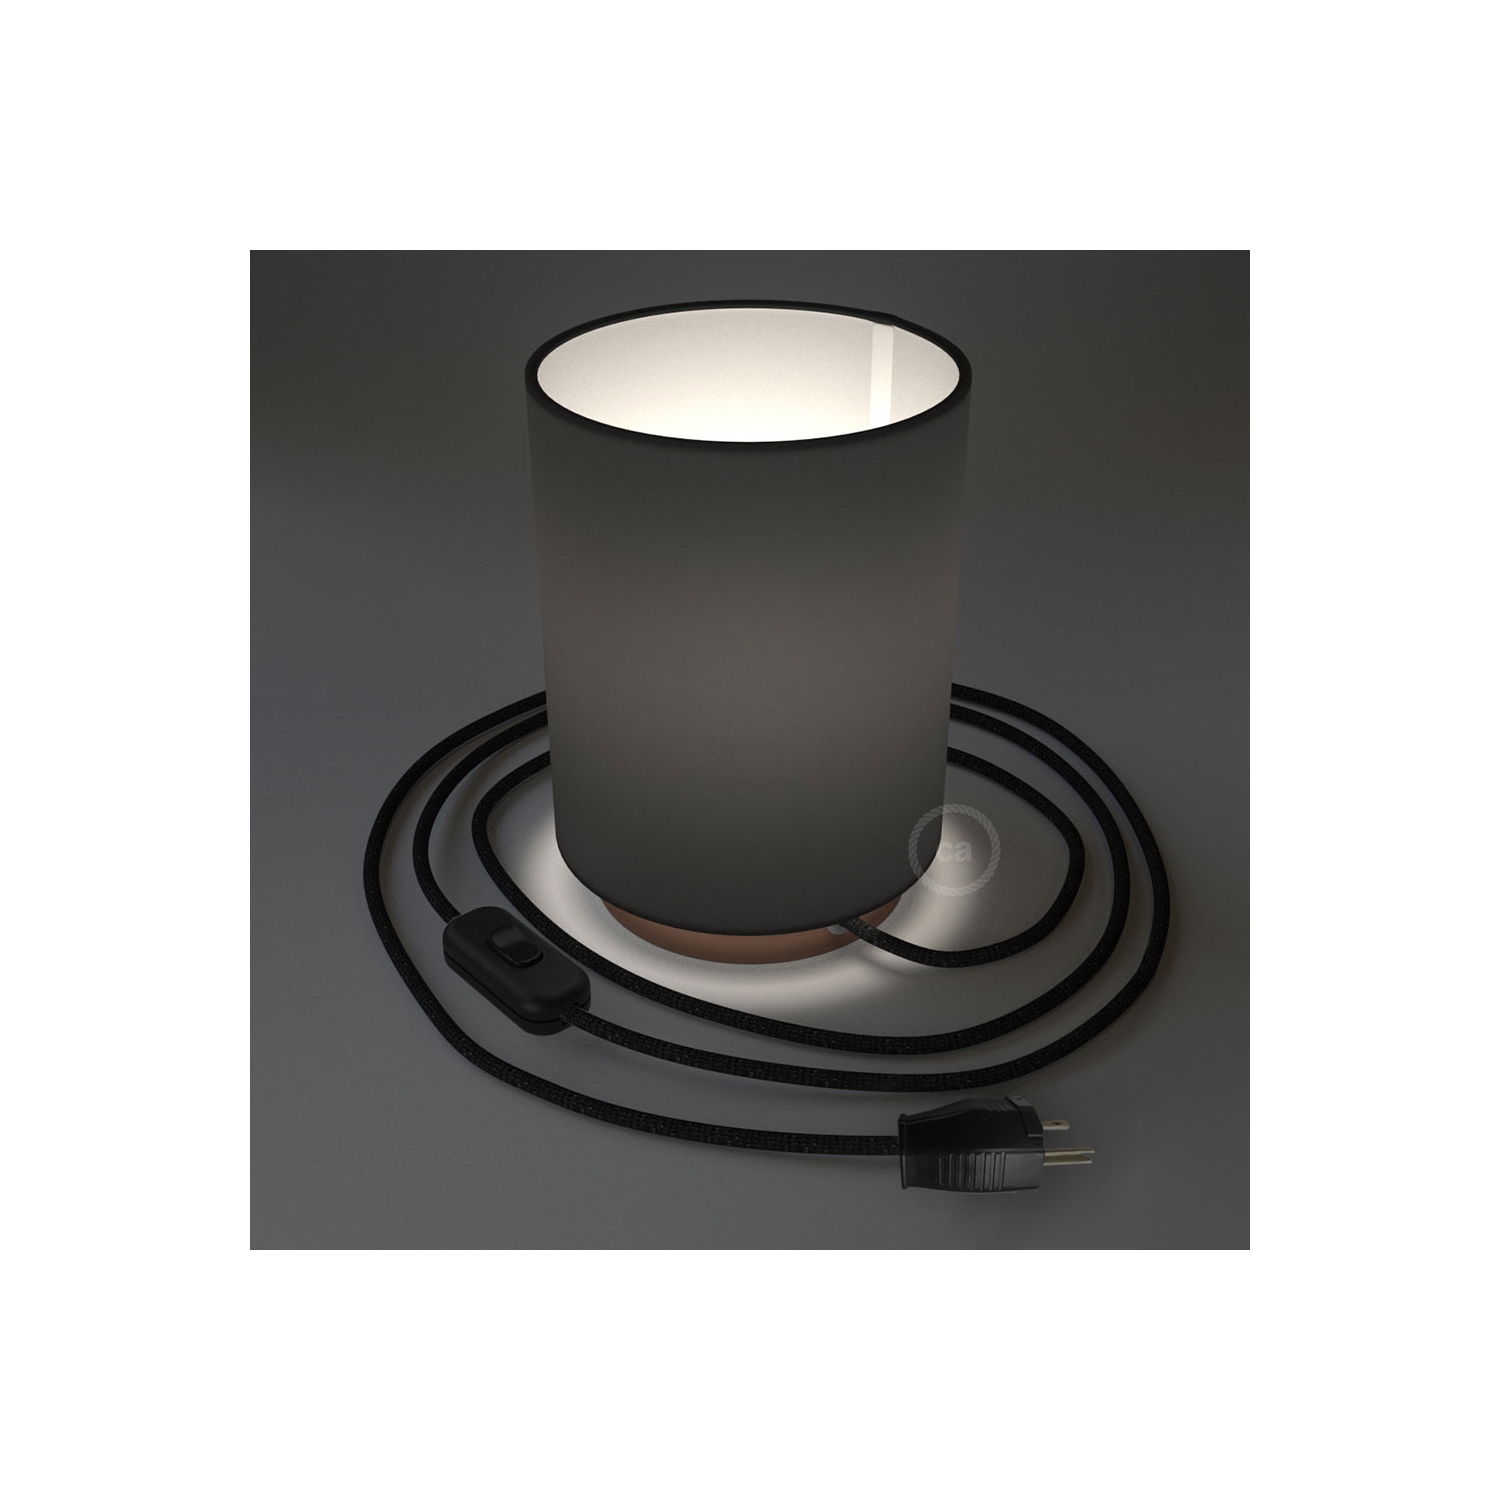 Posaluce with Black Canvas Cylinder lampshade, coppered metal, with textile cable, switch and plug